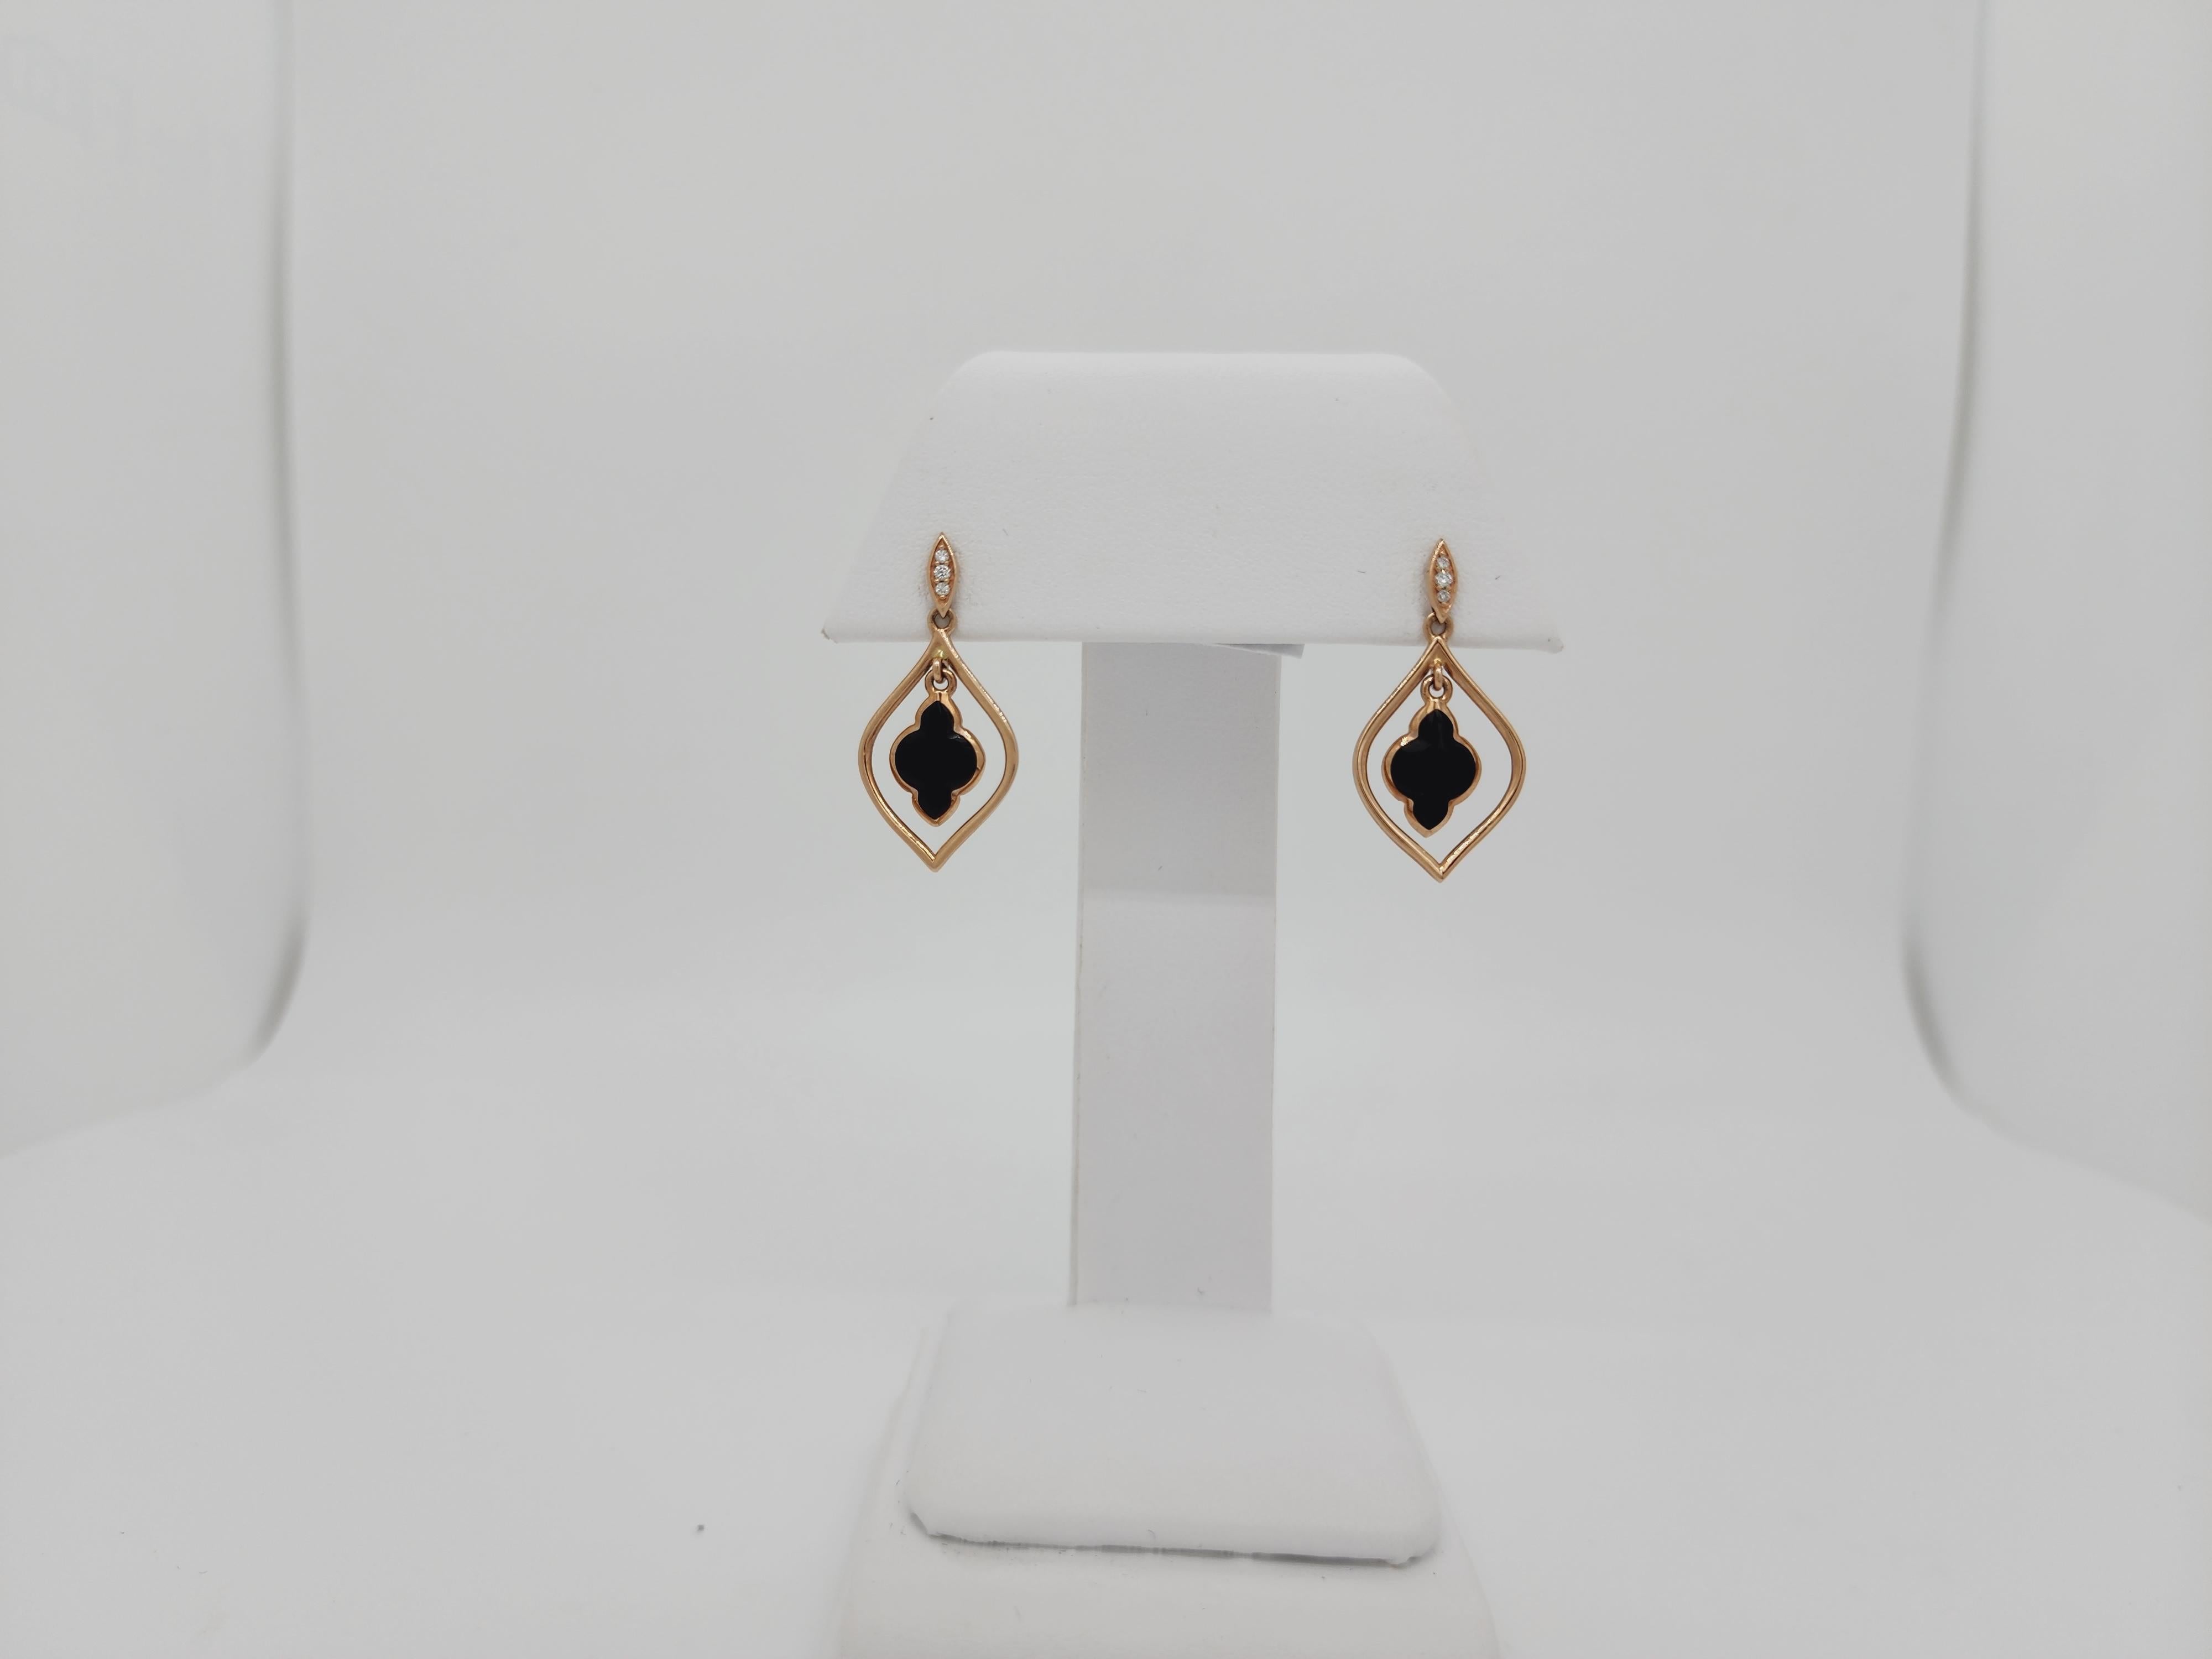 Beautiful estate Kabana earrings with onyx free shape stones and 0.04 ct. white diamond rounds.  Handmade in 14k yellow gold.  Made in the USA.